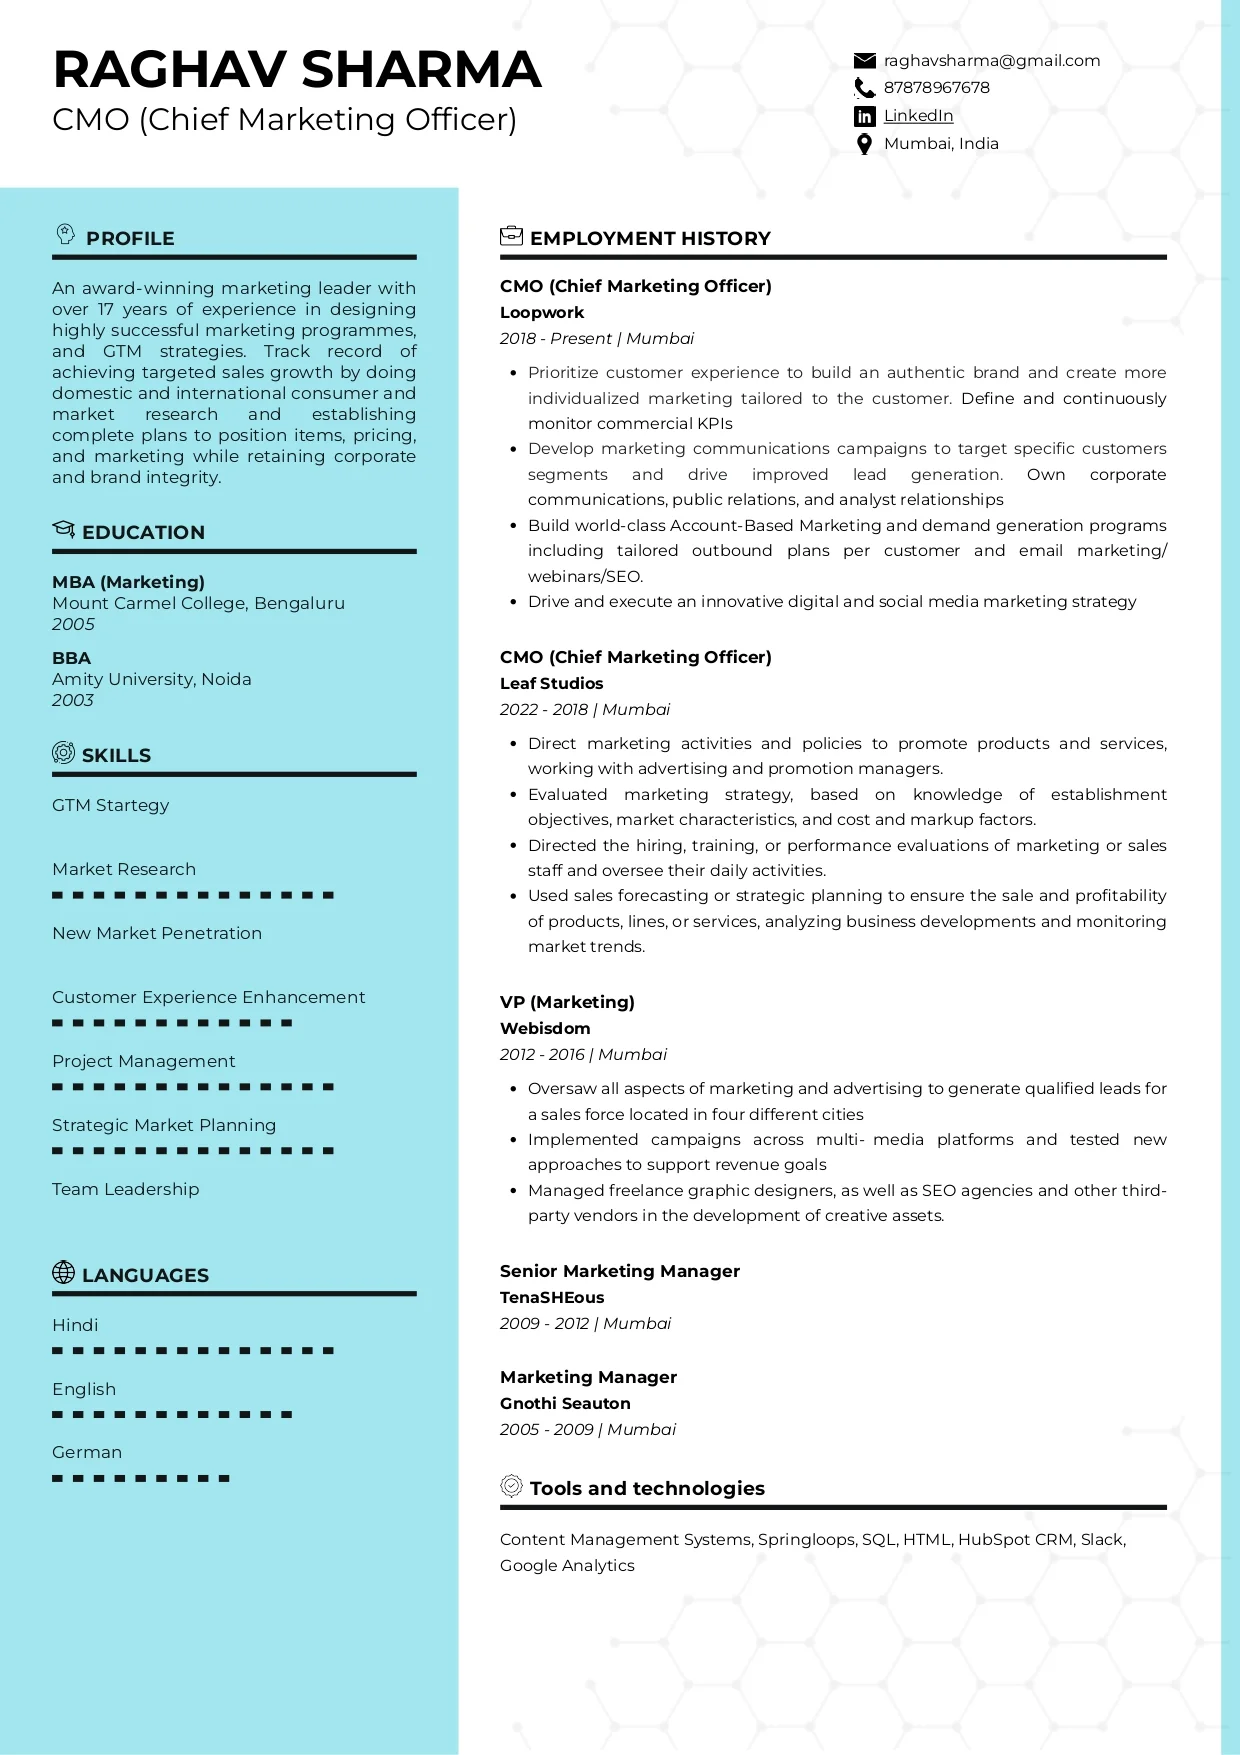 Sample Resume of Chief Marketing Officer (CMO) | Free Resume Templates & Samples on Resumod.co